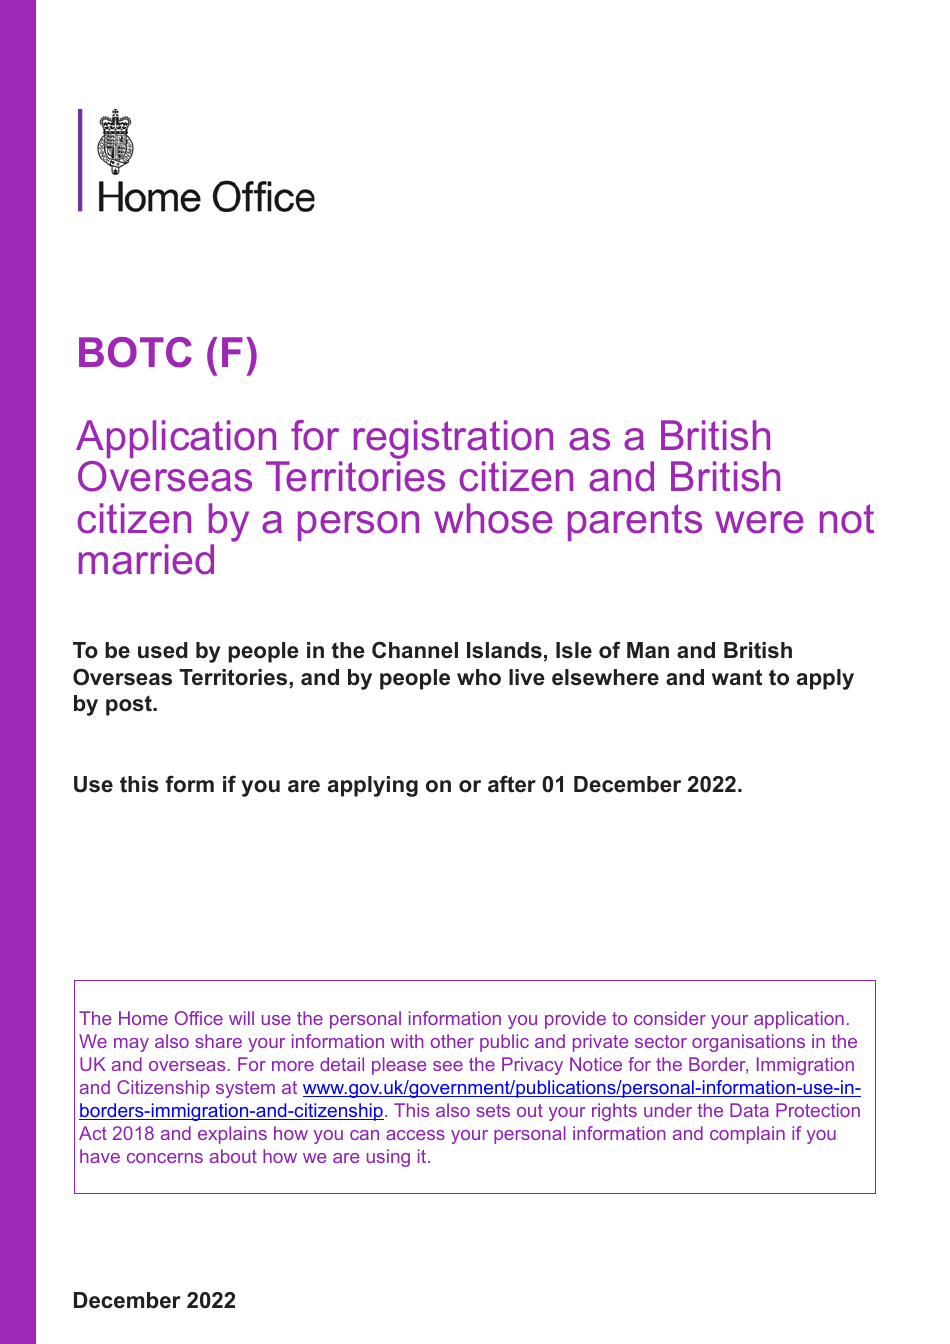 Form BOTC (F) Application for Registration as a British Overseas Territories Citizen and British Citizen by a Person Whose Parents Were Not Married - United Kingdom, Page 1